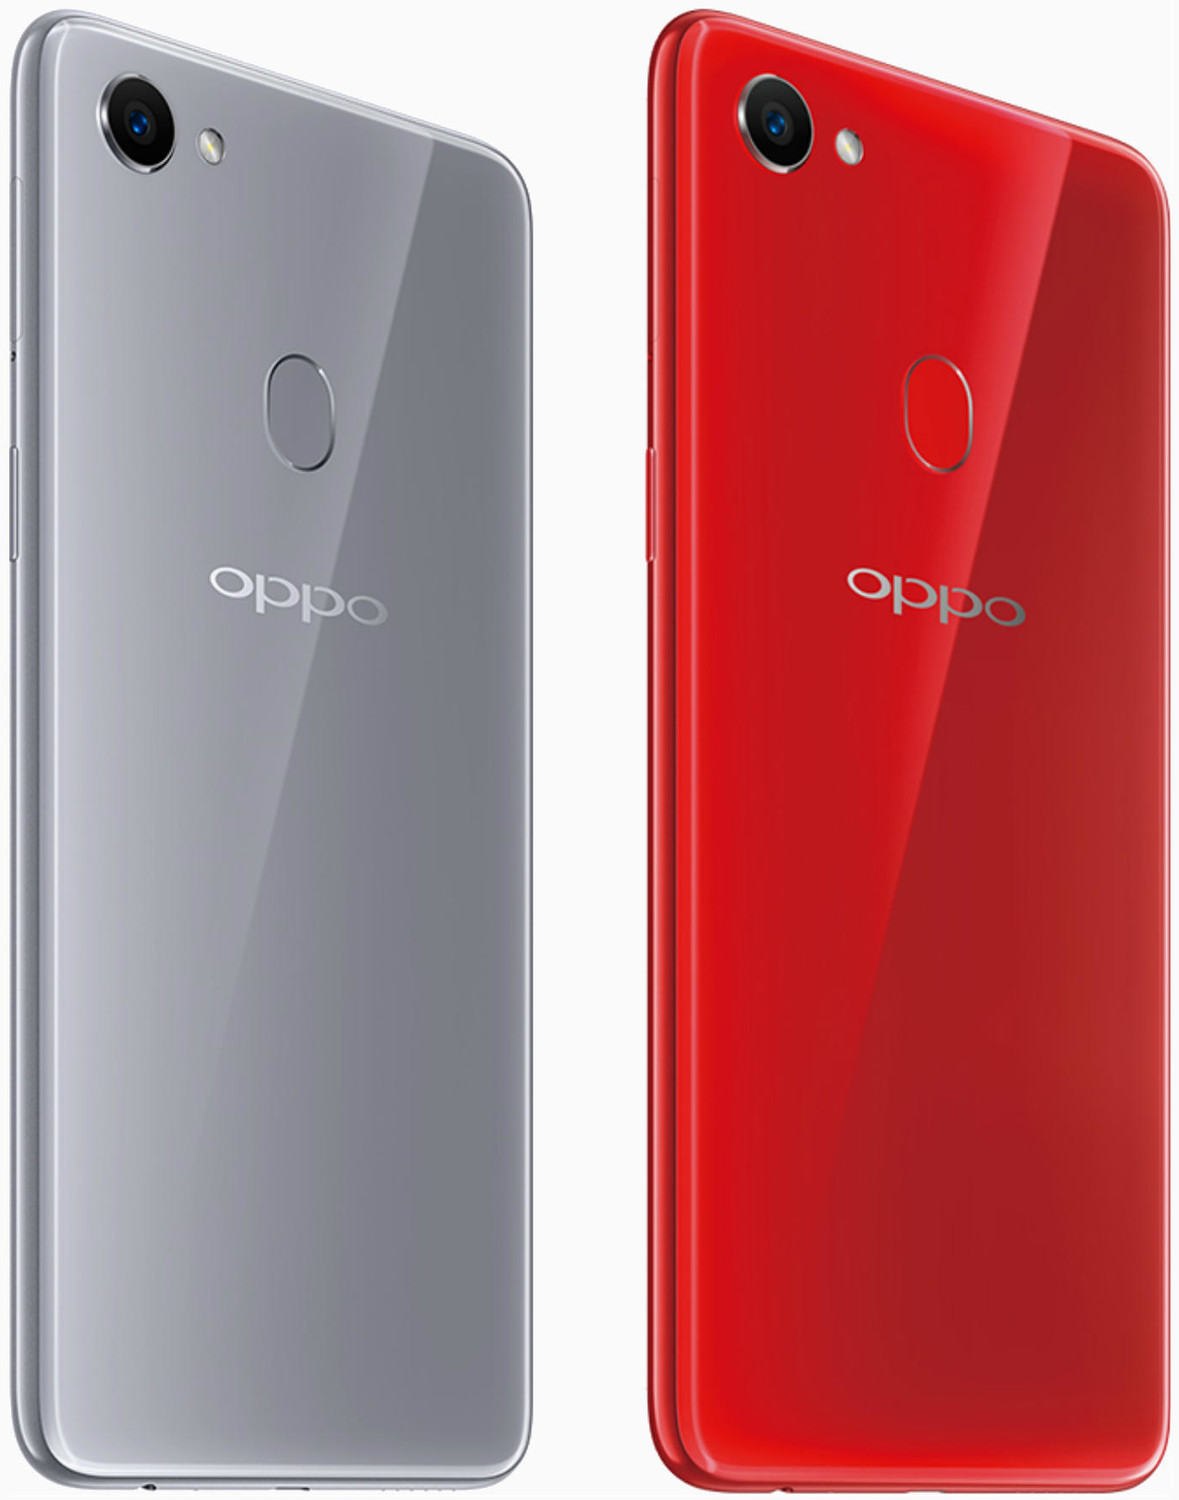 Oppo F7 128GB - Specs and Price - Phonegg1179 x 1500